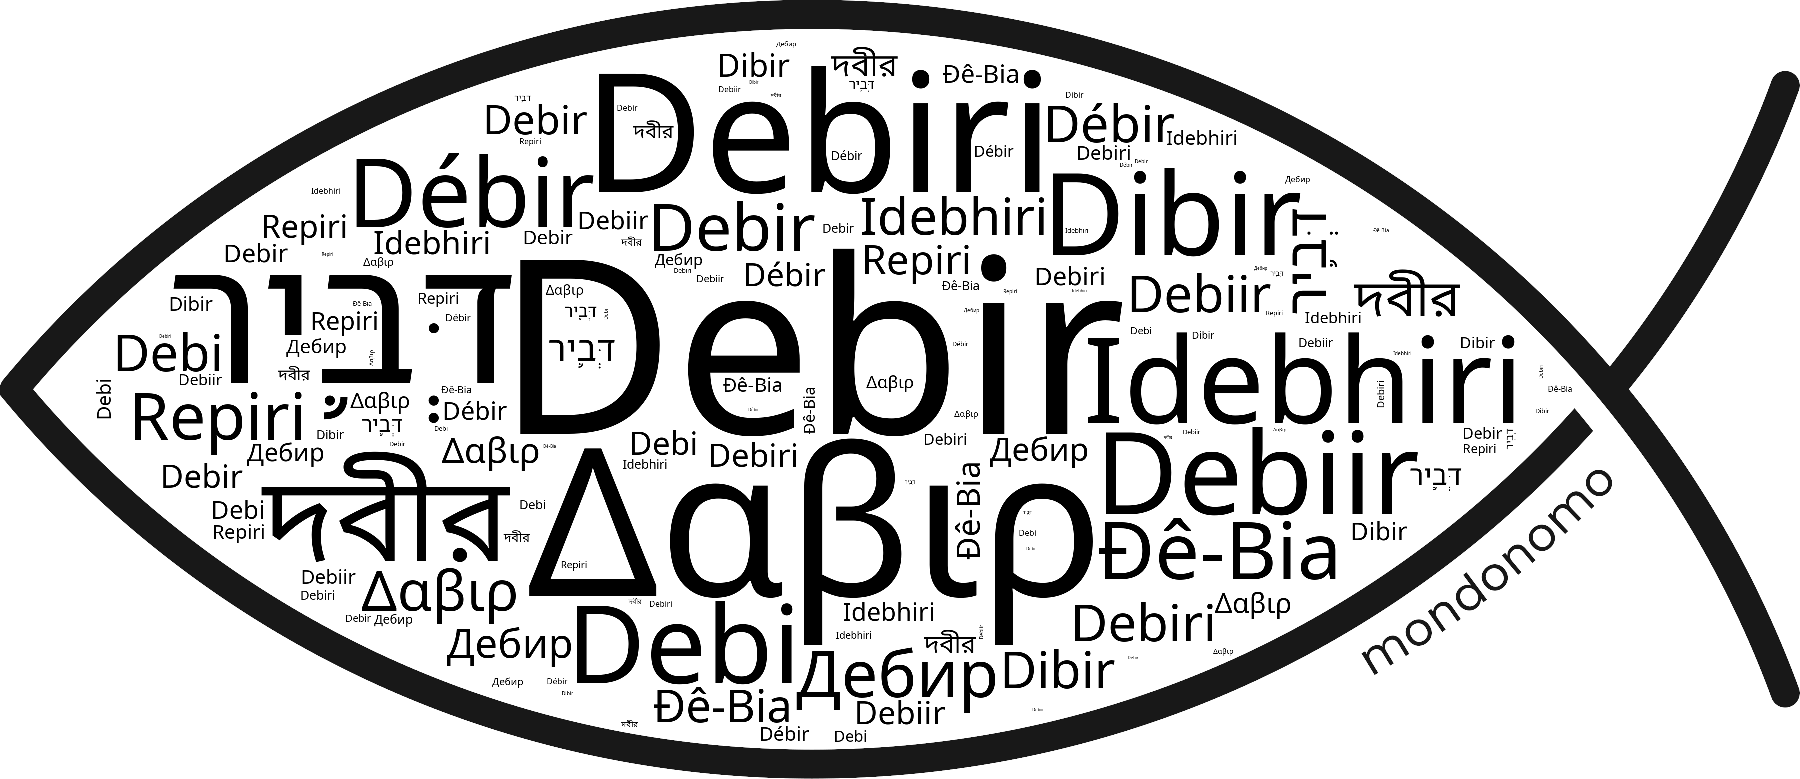 Name Debir in the world's Bibles